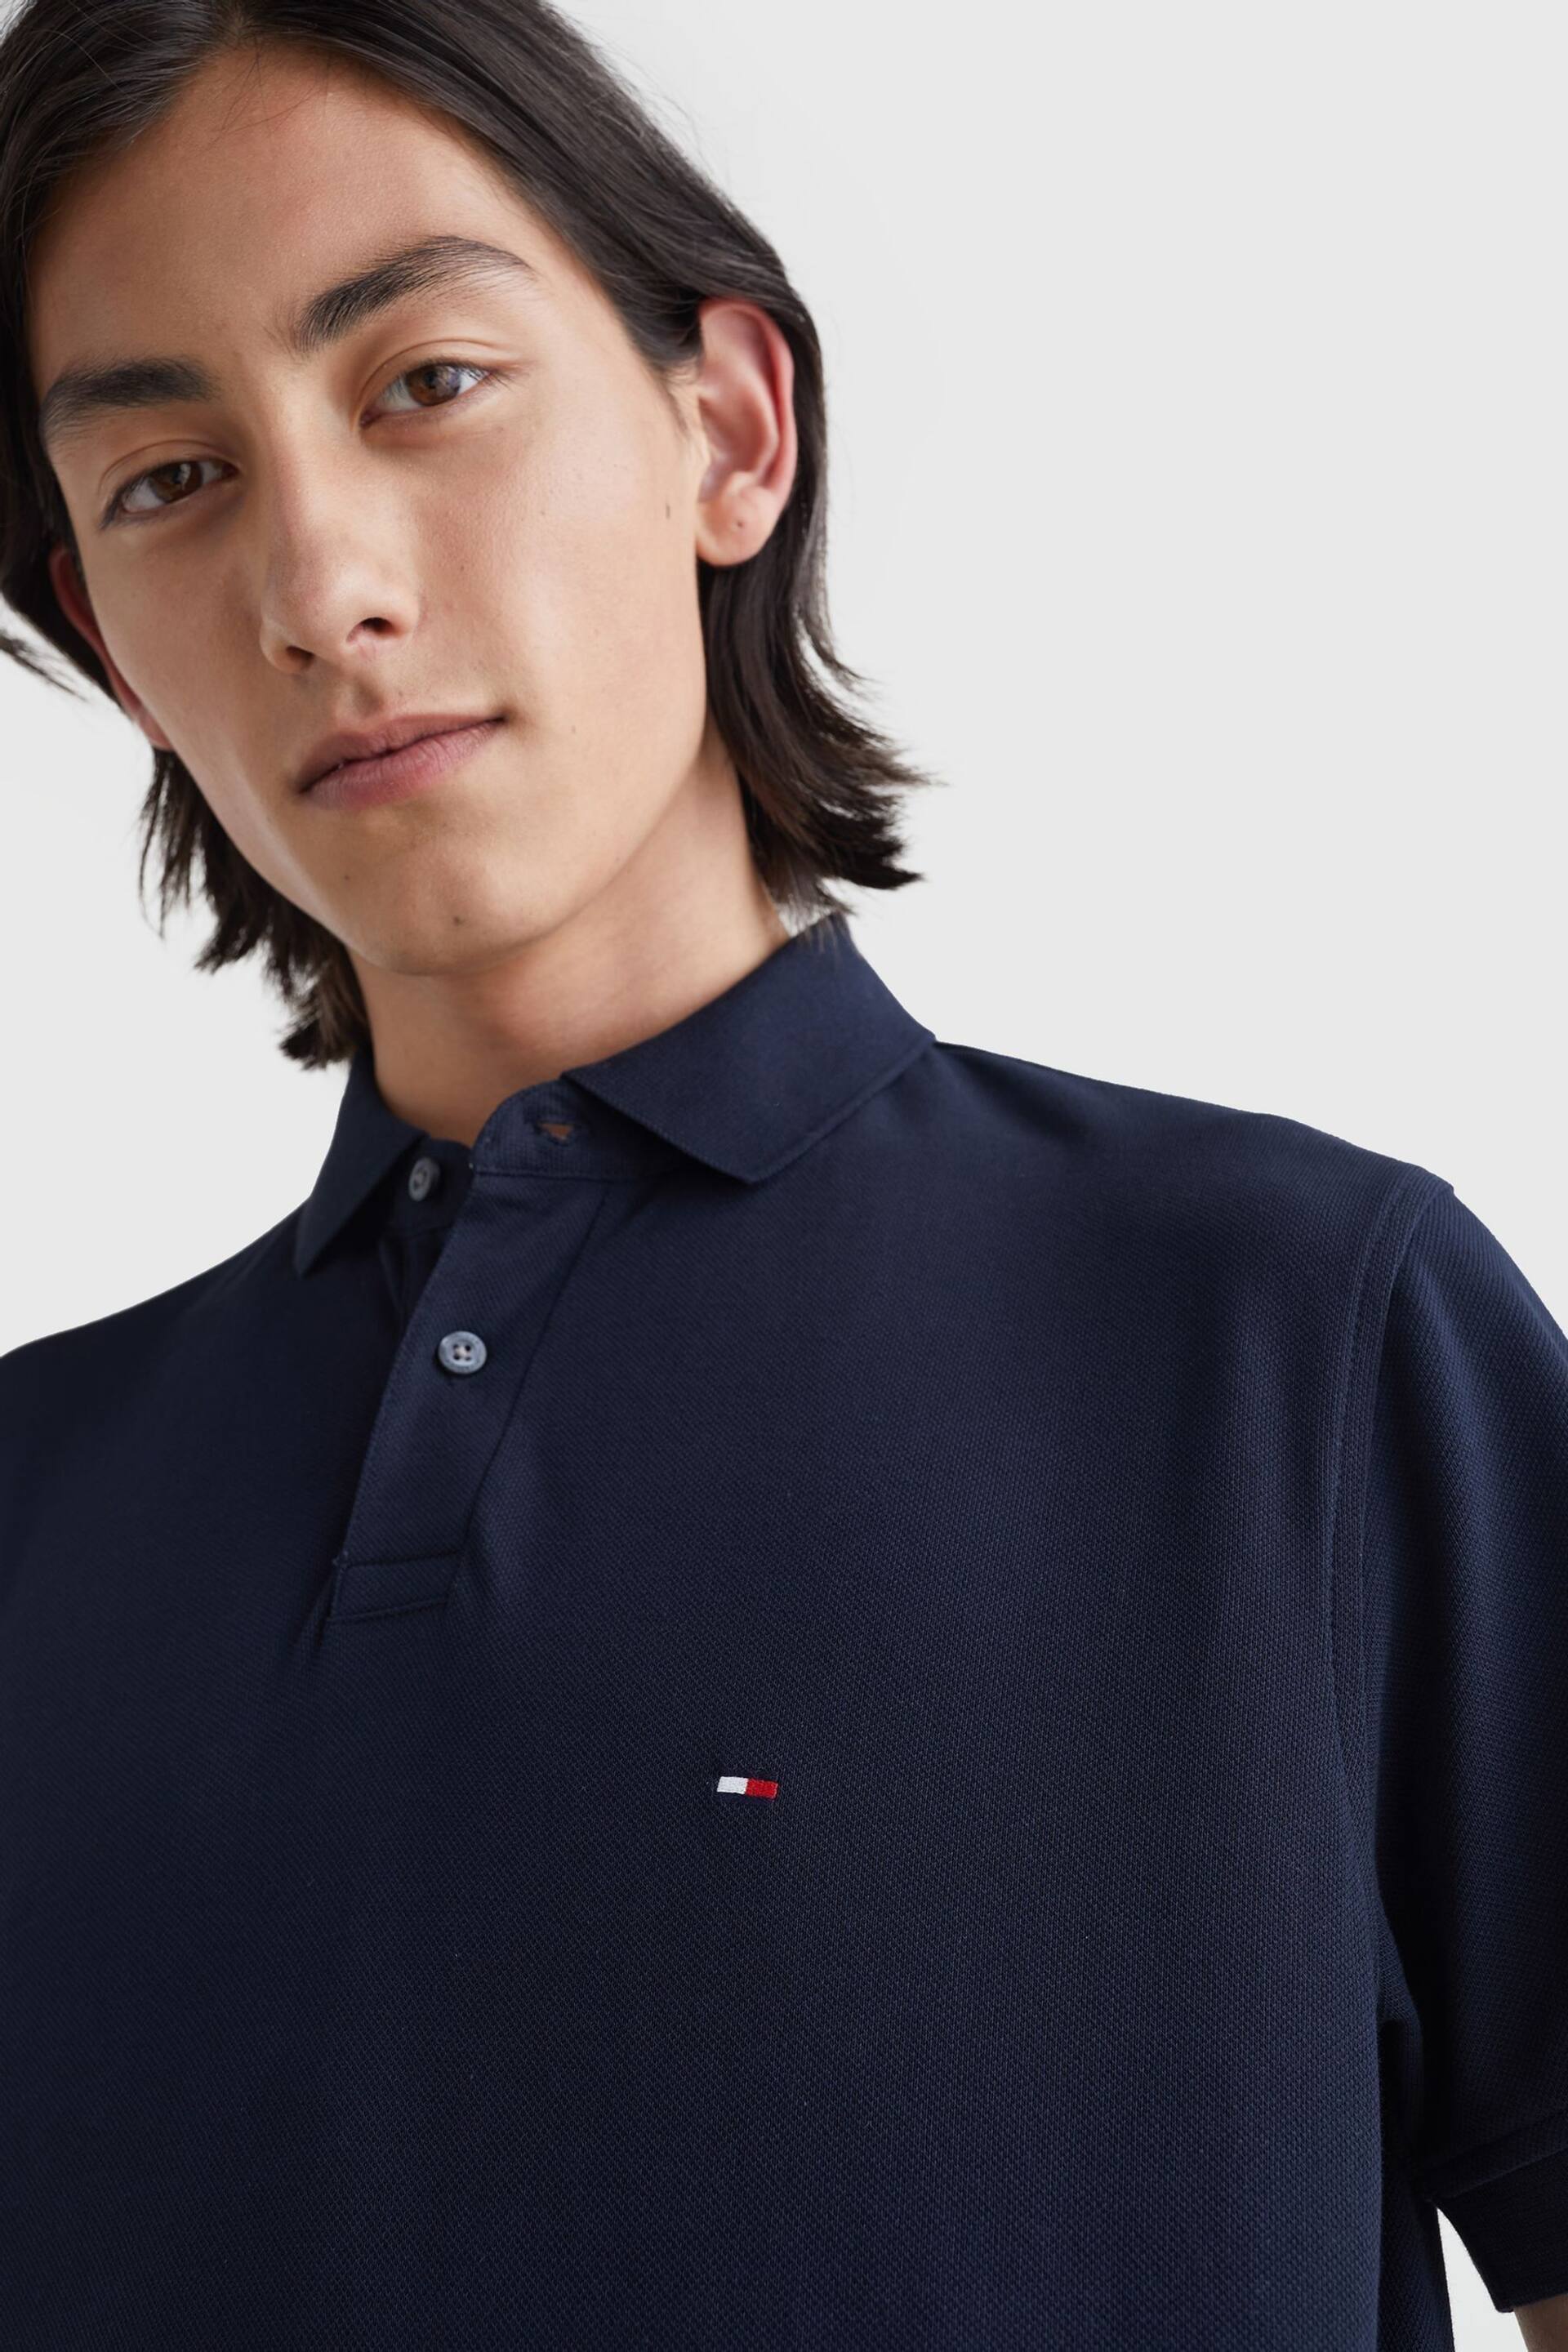 Tommy Hilfiger Blue 1985 Polo Shirt - Image 4 of 5